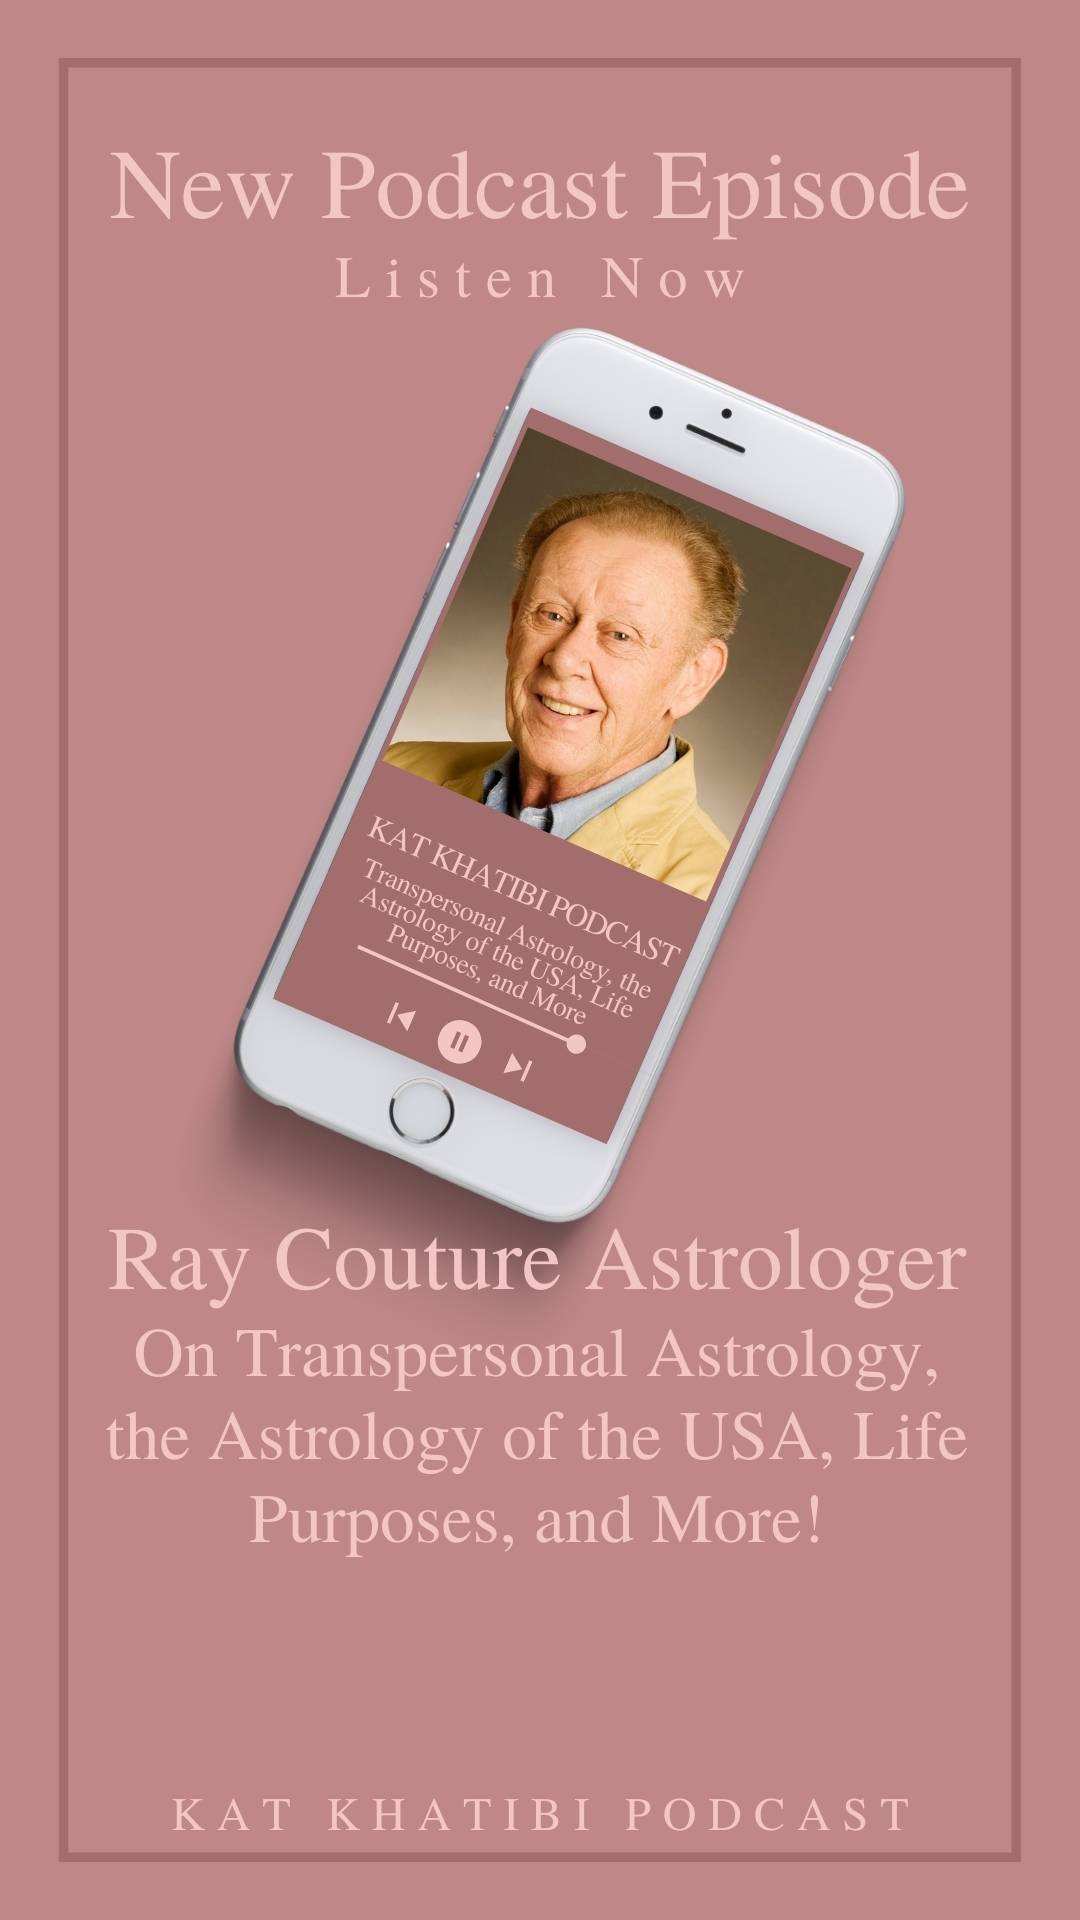 Ray Couture Astrologer: On Transpersonal Astrology, the Astrology of the USA, Life Purposes, and More